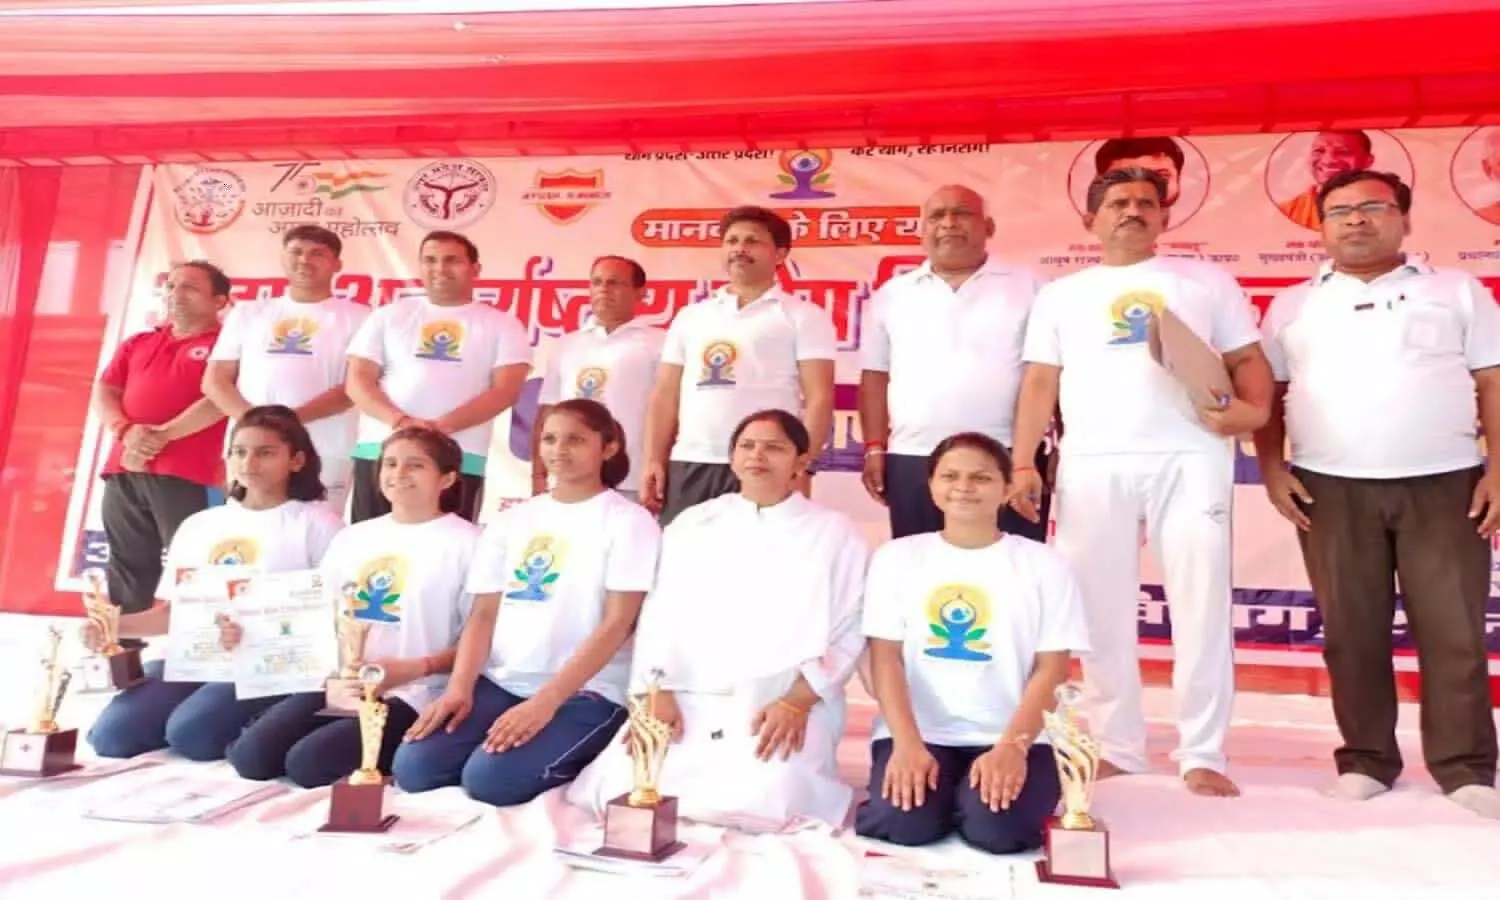 Make yoga a part of daily life, organized yoga camp in the entire district including Sonbhadra district headquarters